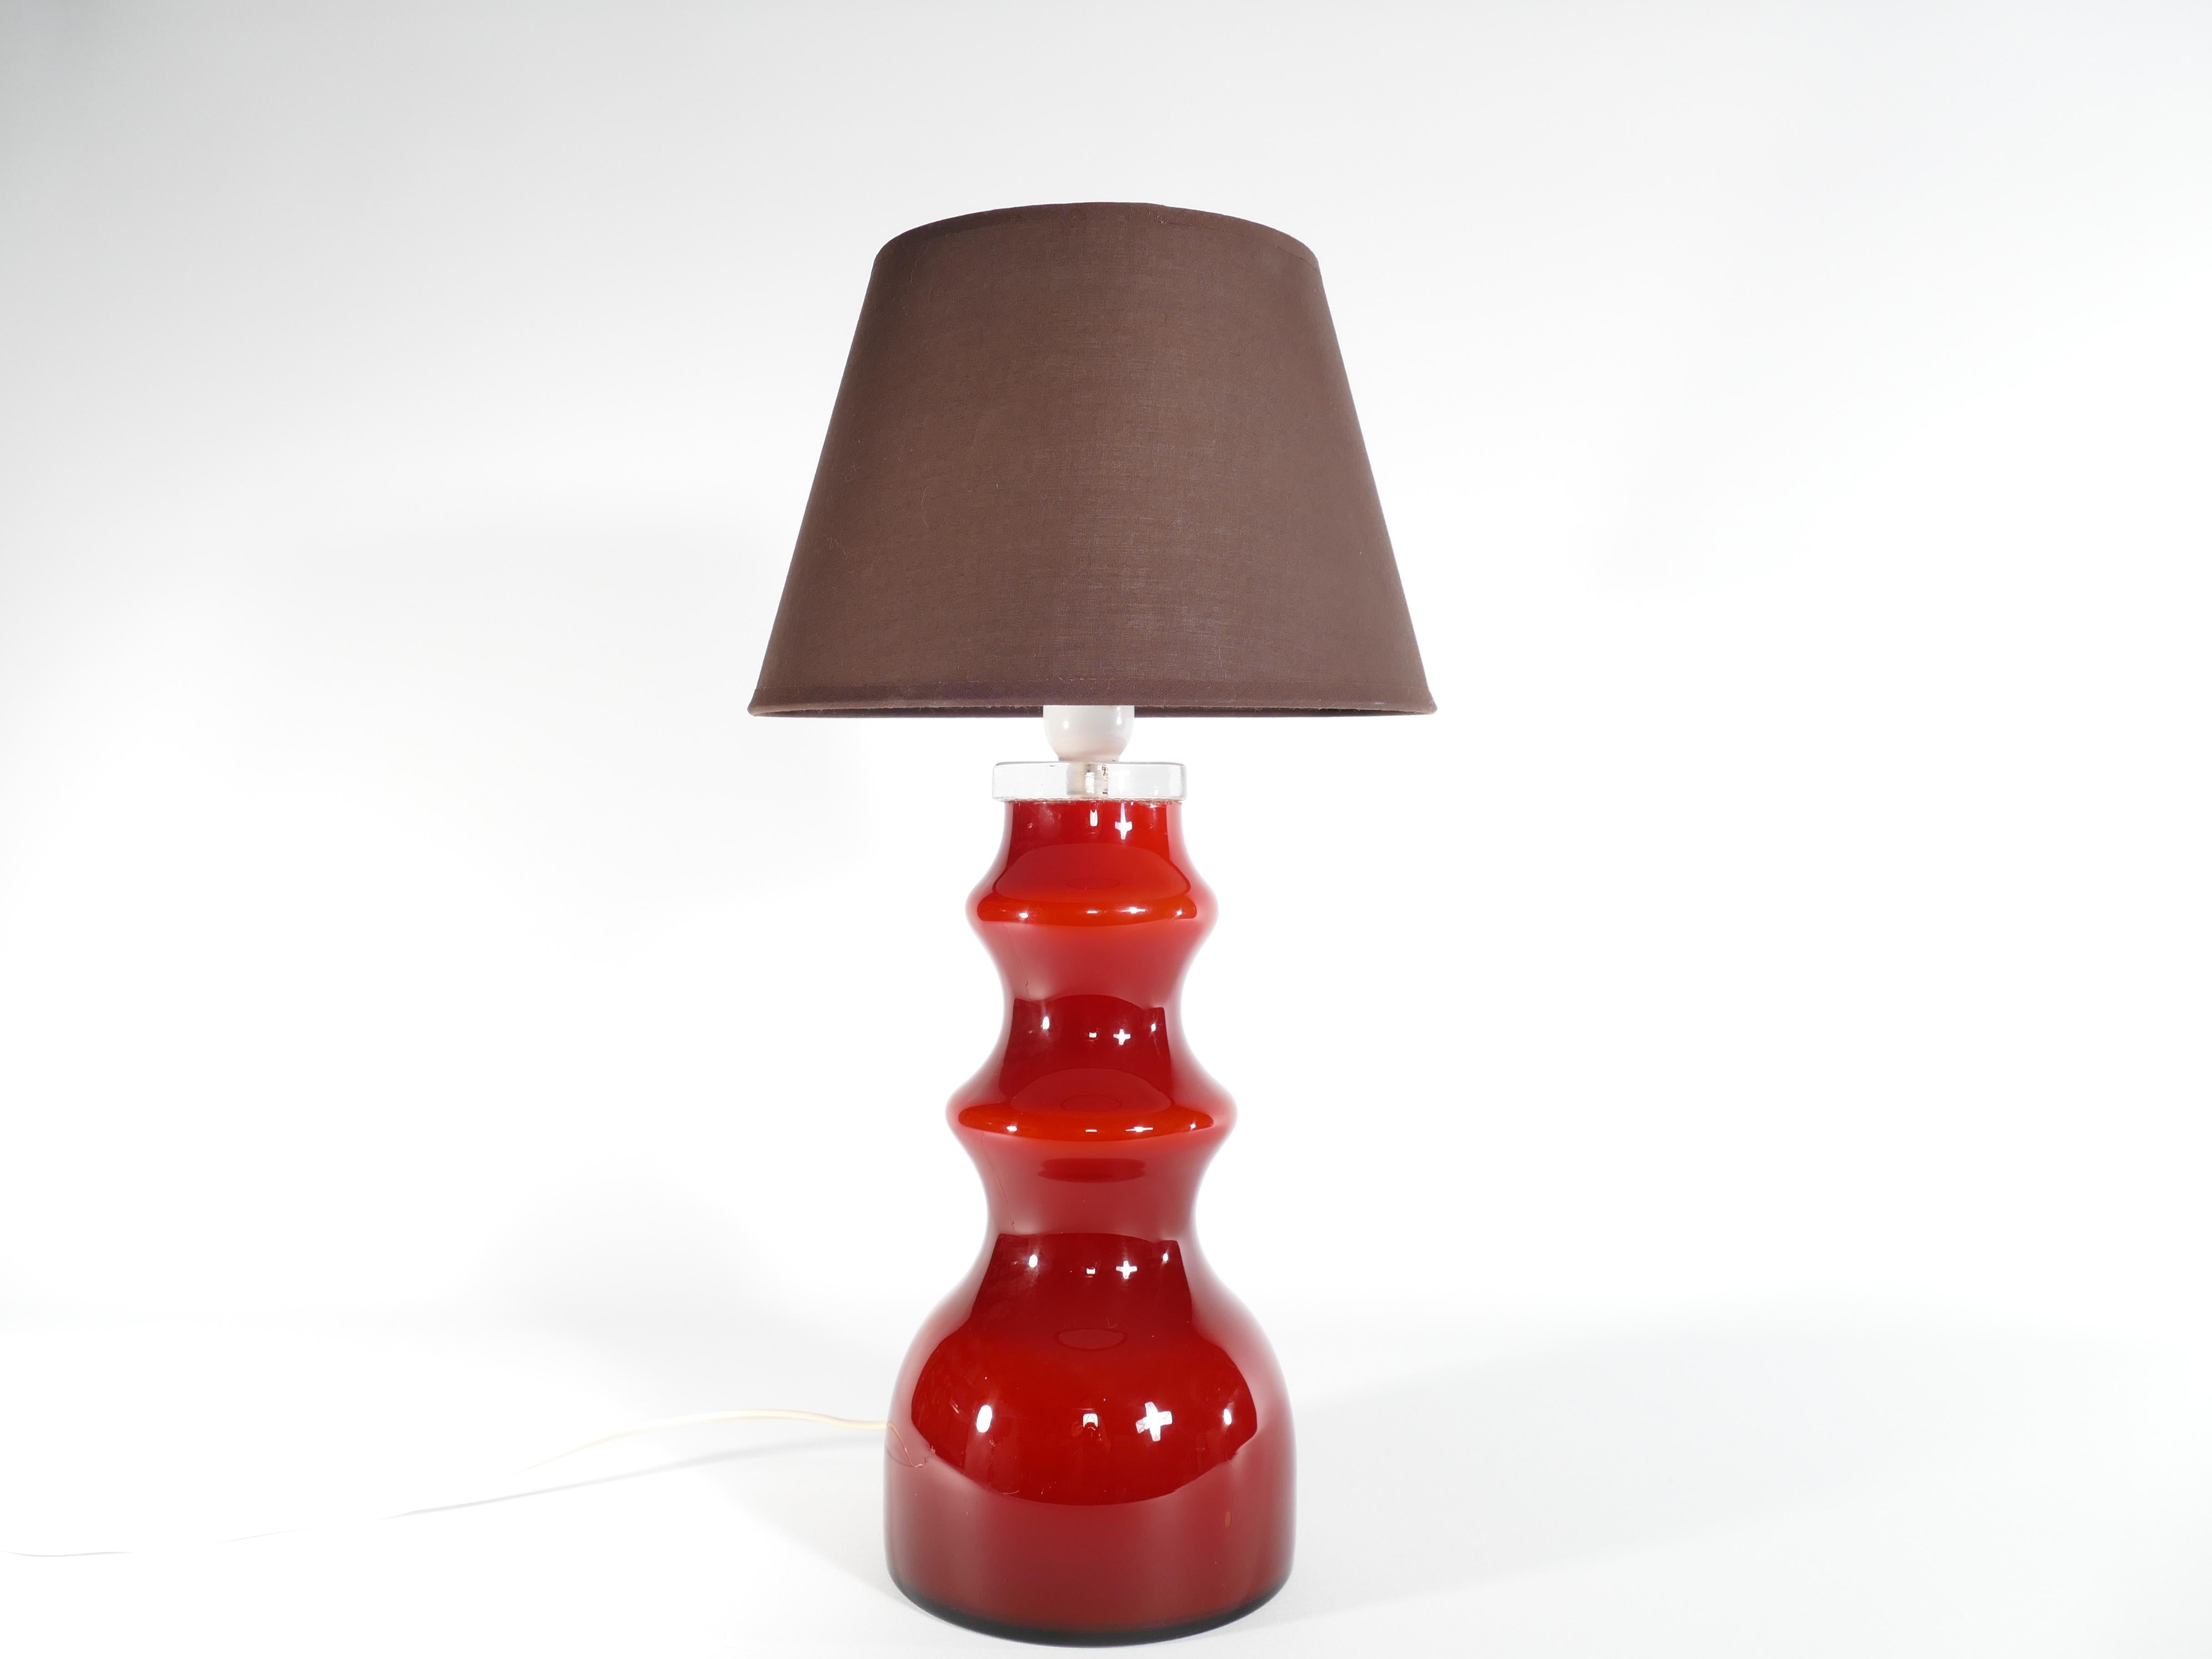 Scandinavian Modern Oxblood Red Table Lamp  by Gert Nyström for Hyllinge In Good Condition For Sale In Grythyttan, SE